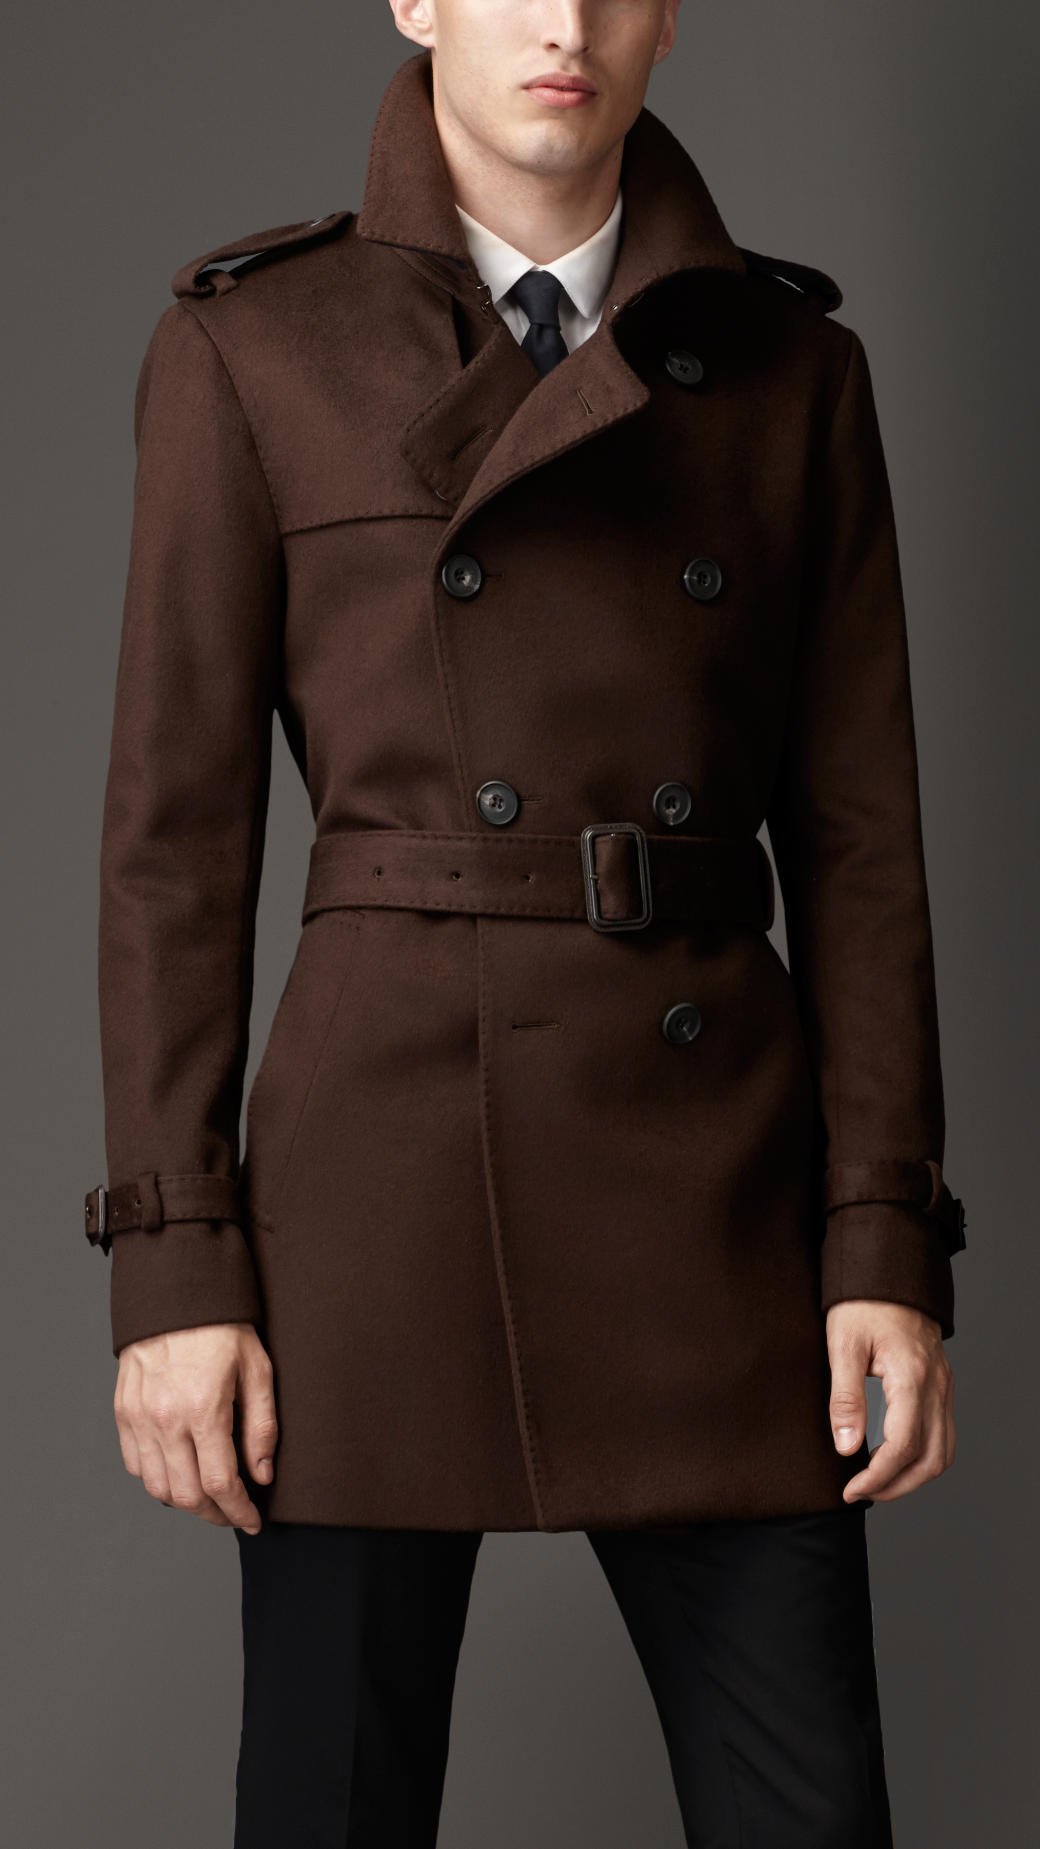 Lyst - Burberry Midlength Wool Cashmere Trench Coat in Brown for Men